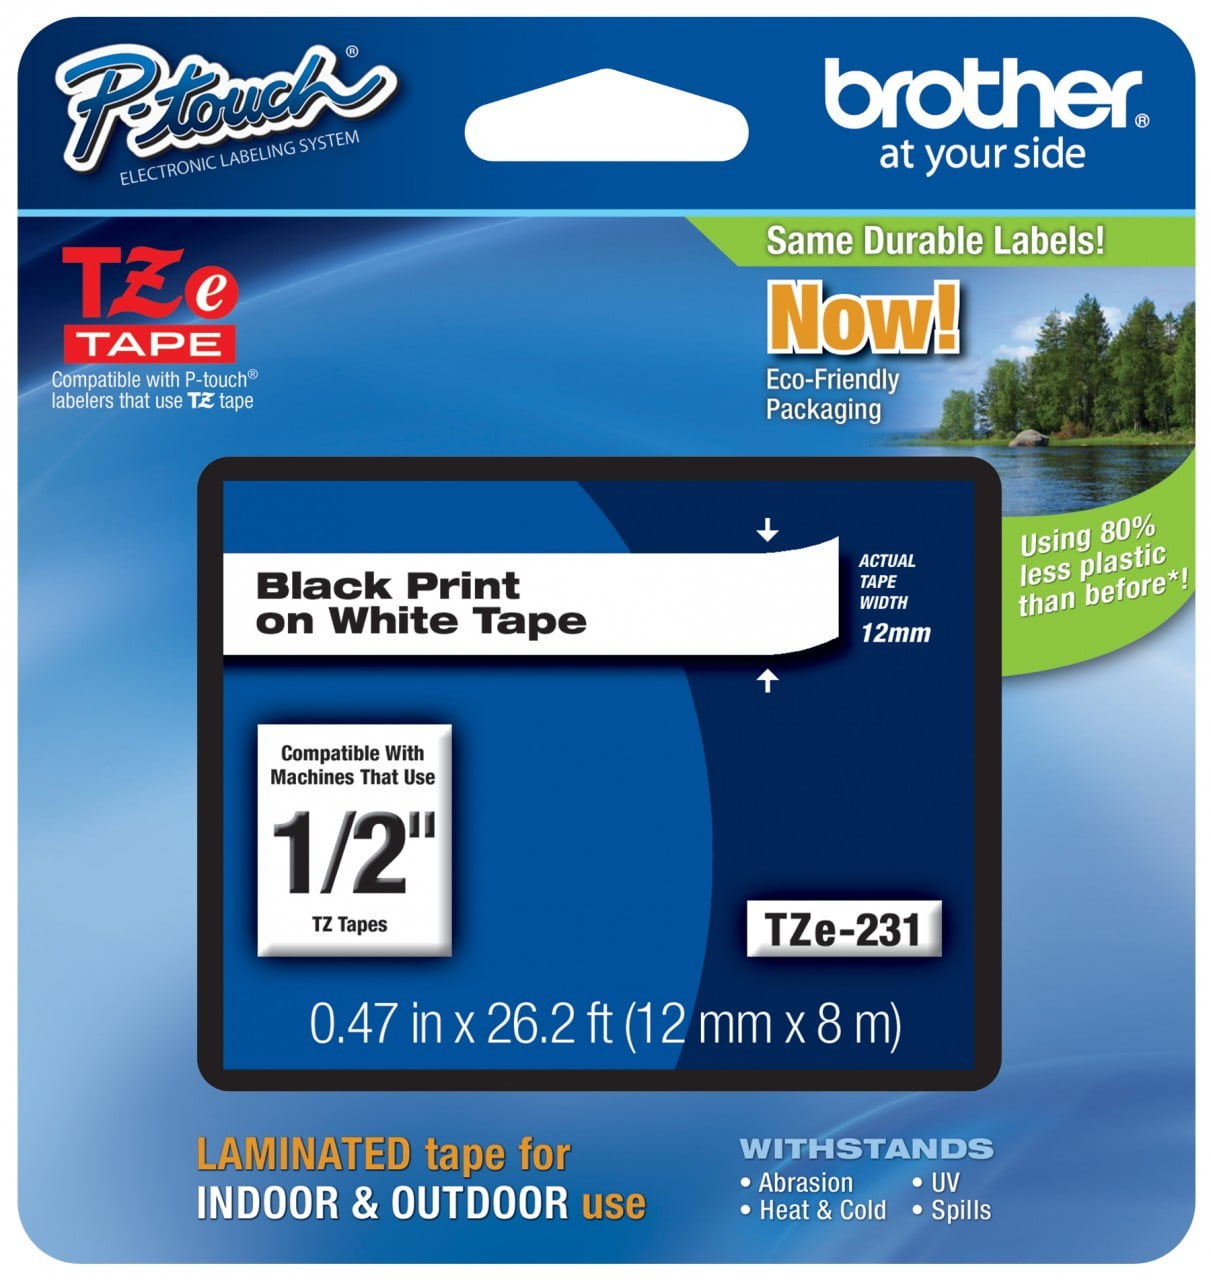 TZ-231 TZe-231 Black on White NEOUZA Compatible For Brother P-Touch Laminated TZe TZ Label Tape Cartridge 12mm x 8m